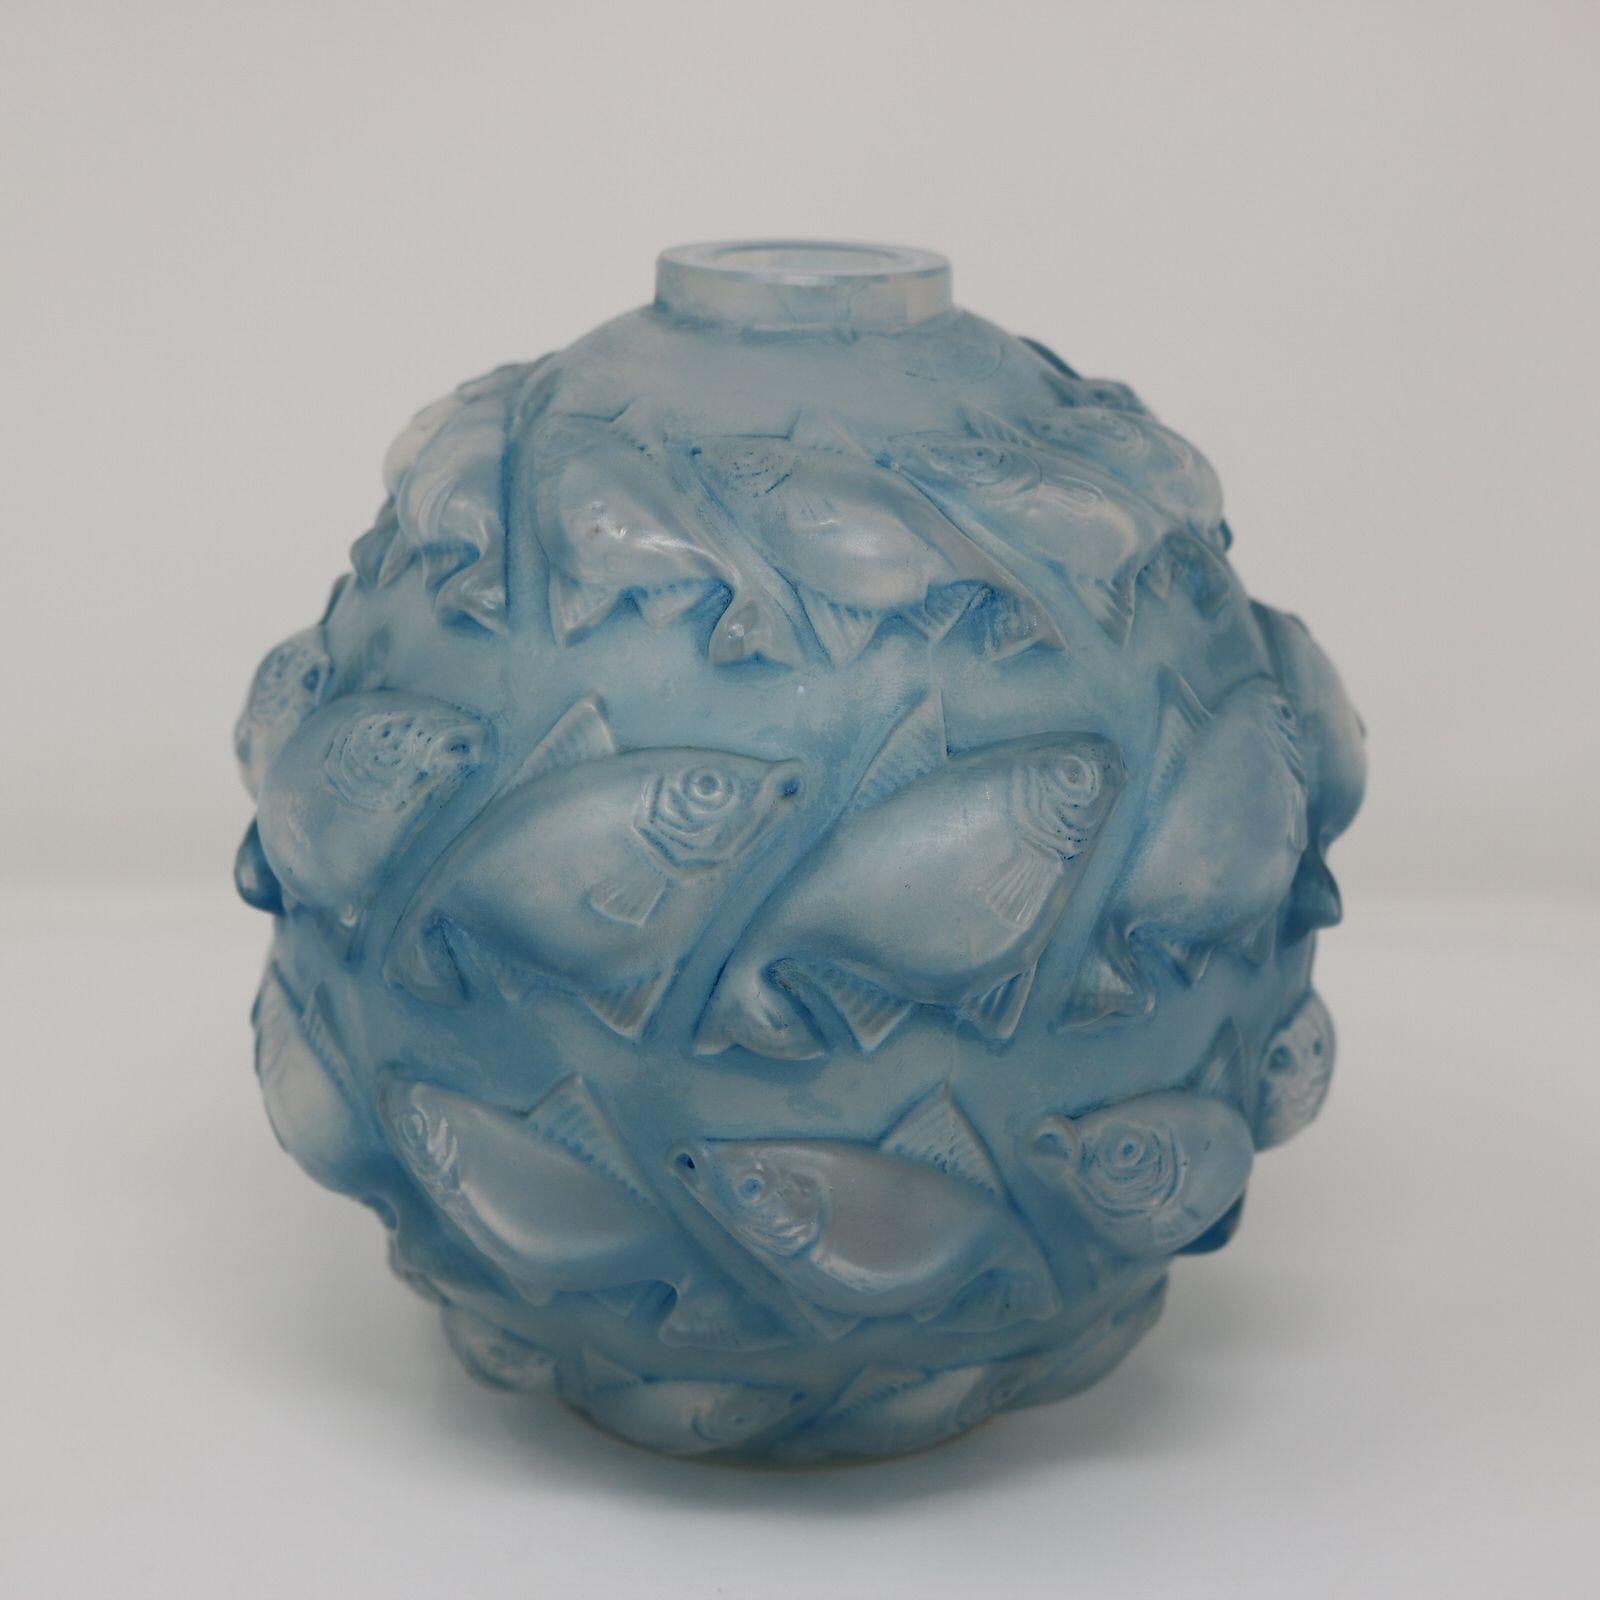 Rene Lalique Opalescent Glass with blue staining, 'Camaret' Vase. This pattern features four rows of fish molded in relief. Engraved makers marks, 'R Lalique France No.1010'. Book reference: 'R. LALIQUE Catalogue Raisonne De L'Oeuvre De Verre', by